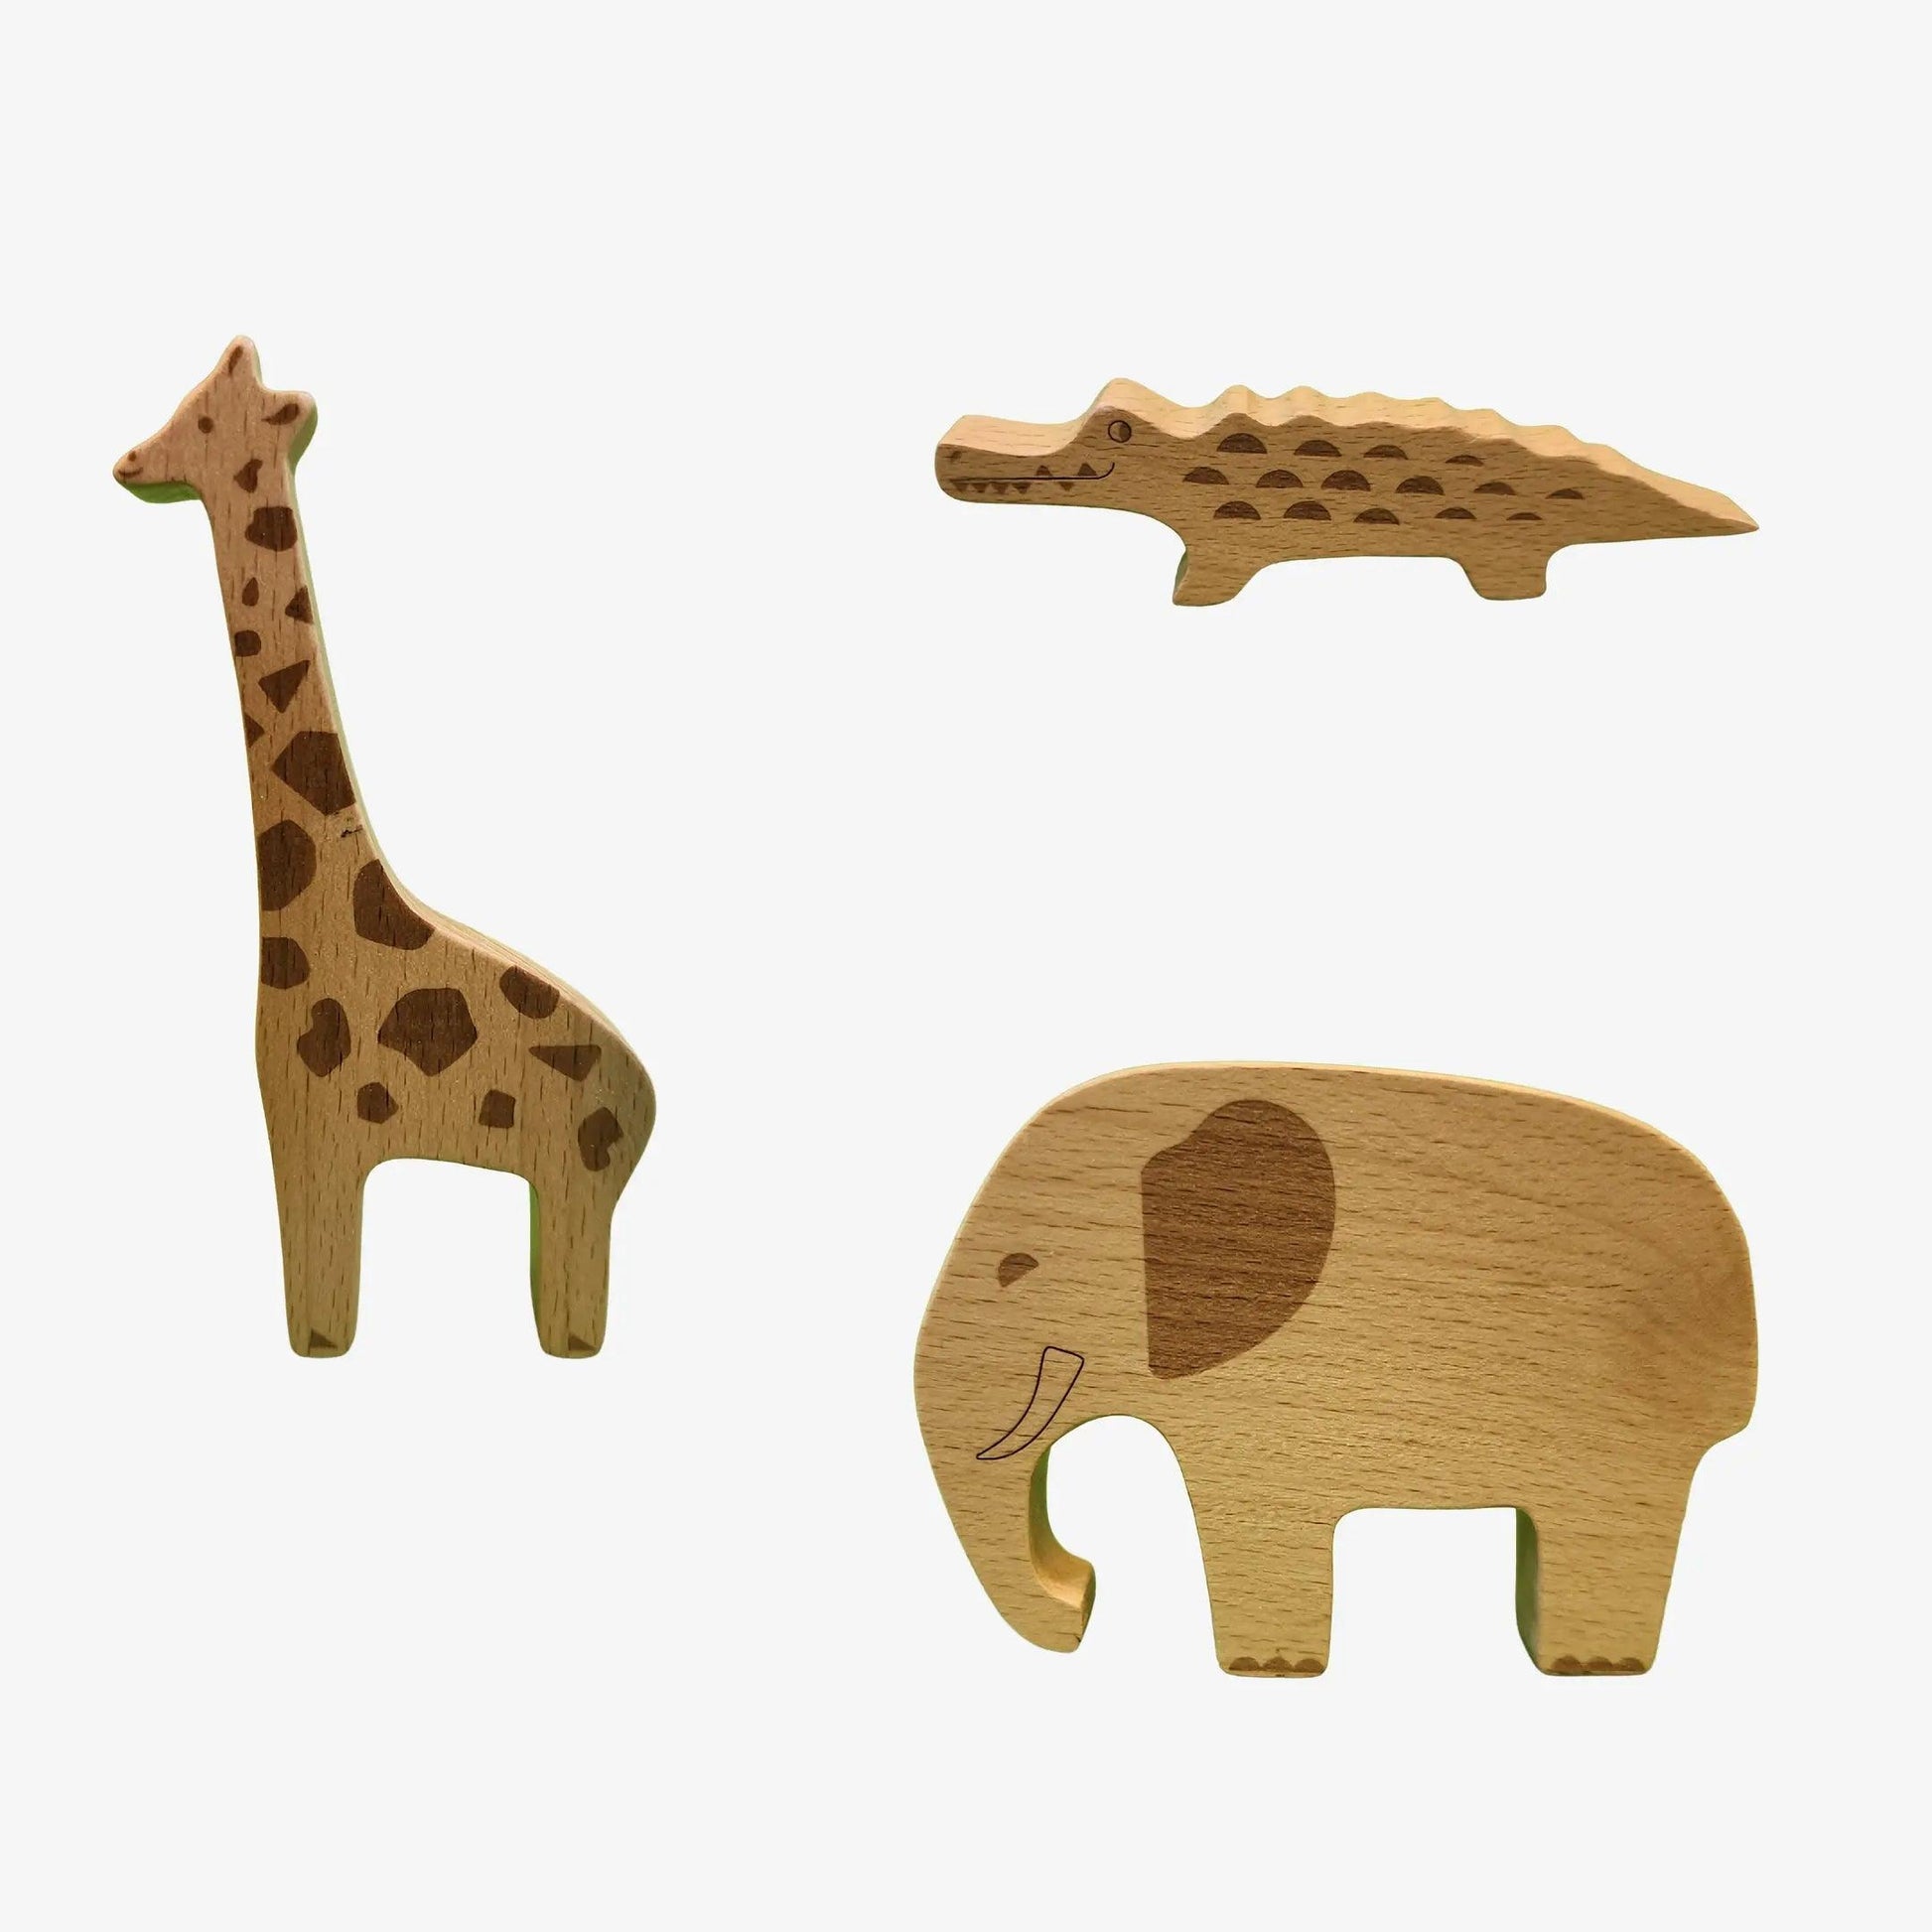 Variety of 11 wooden animals including a monkey and a snake from the '11 Animal set'